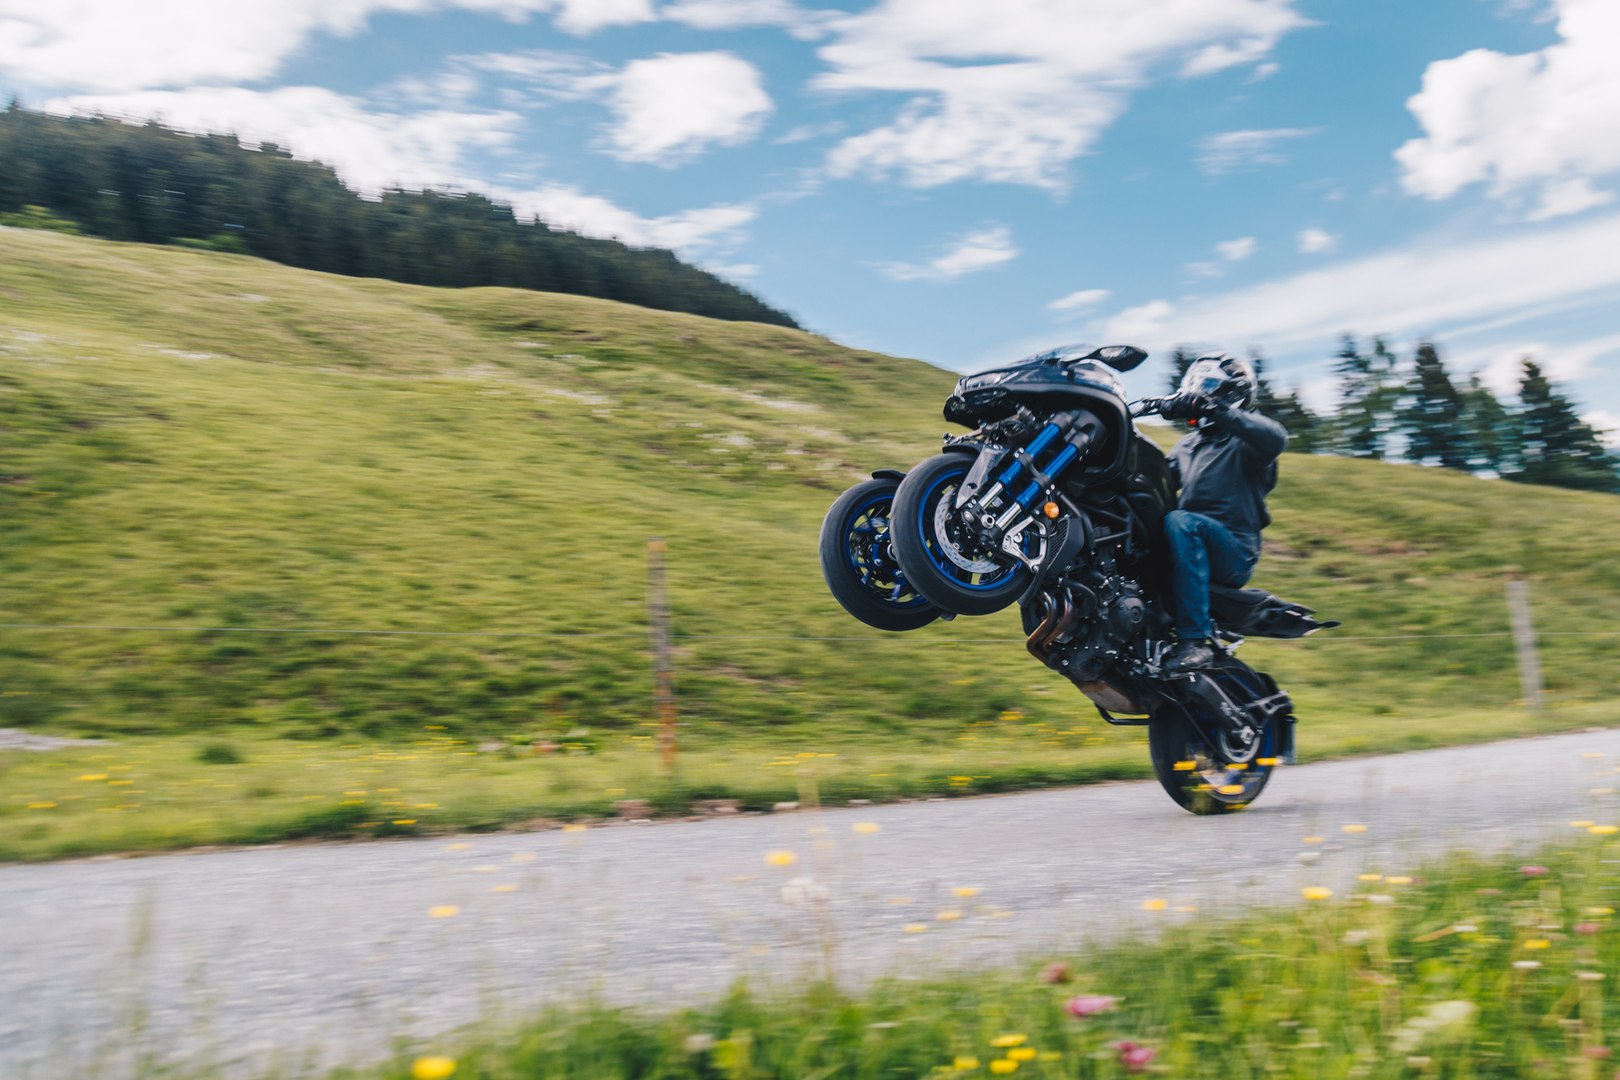 2019 Yamaha NIKEN First Ride Review - On Two Wheels - video Dailymotion